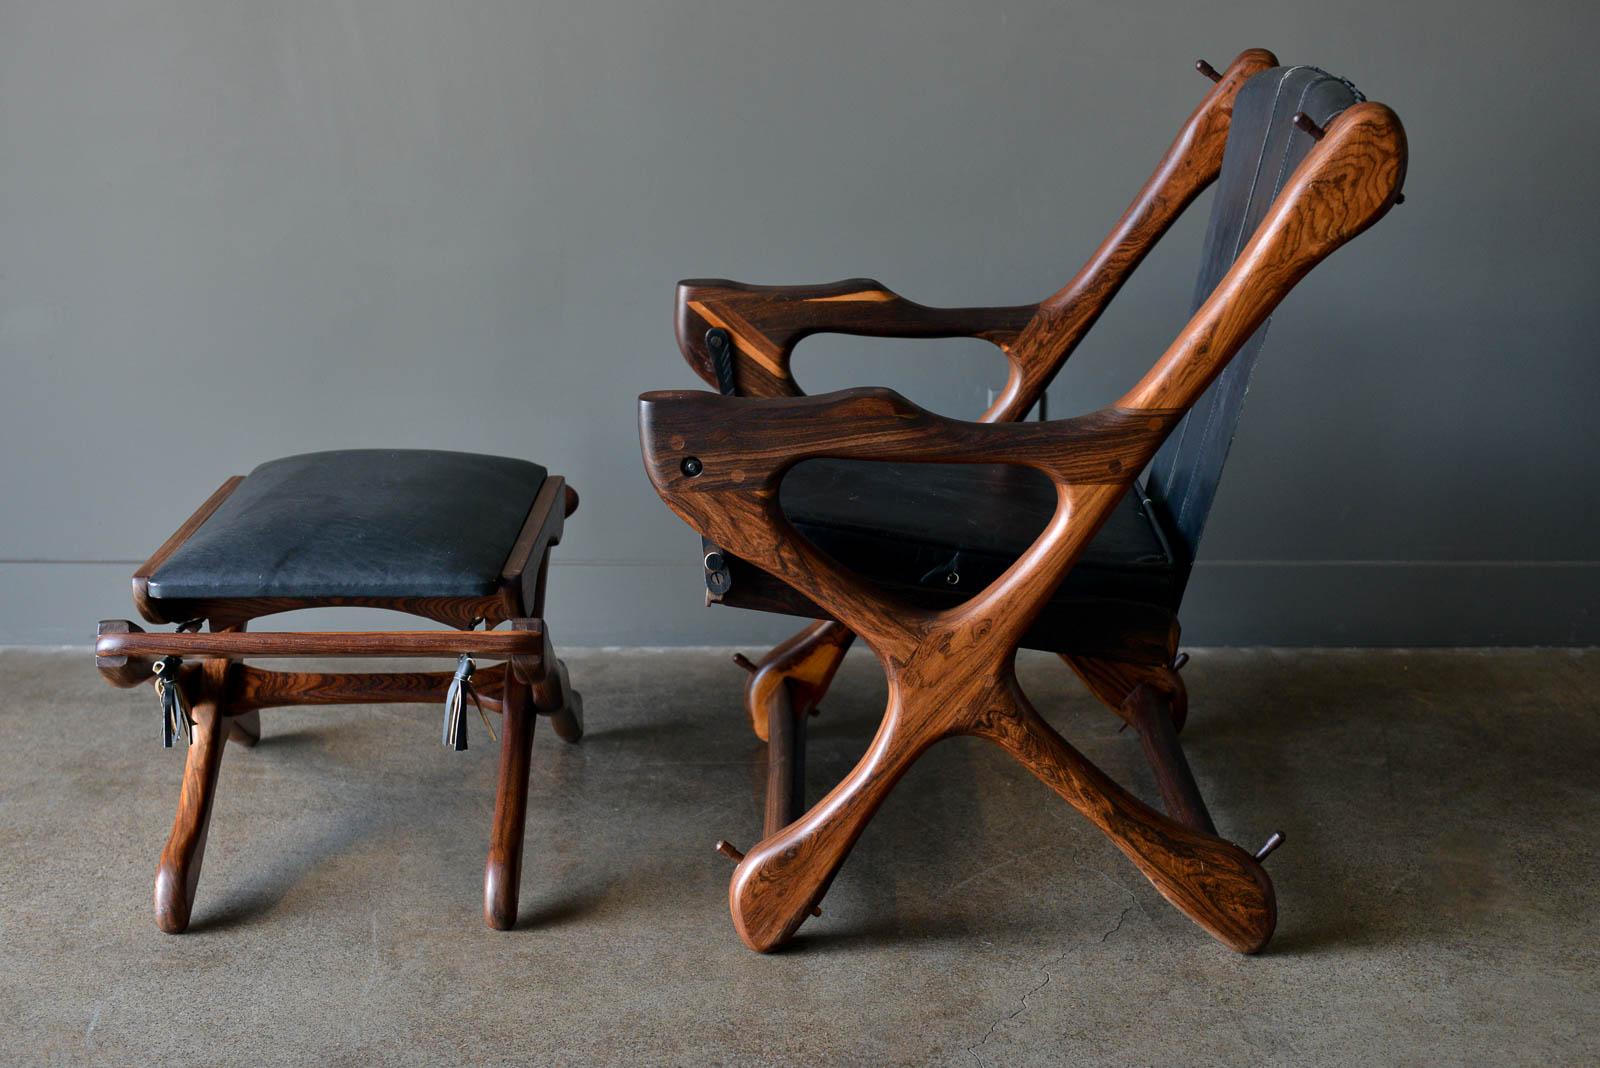 Don Shoemaker 'Swinger' sling chair and ottoman, ca. 1965. Original handmade and signed exotic wood 'swinger' chair by Don Shoemaker with matching ottoman. This particular model is the more rare version with smaller armrests. As seen in this